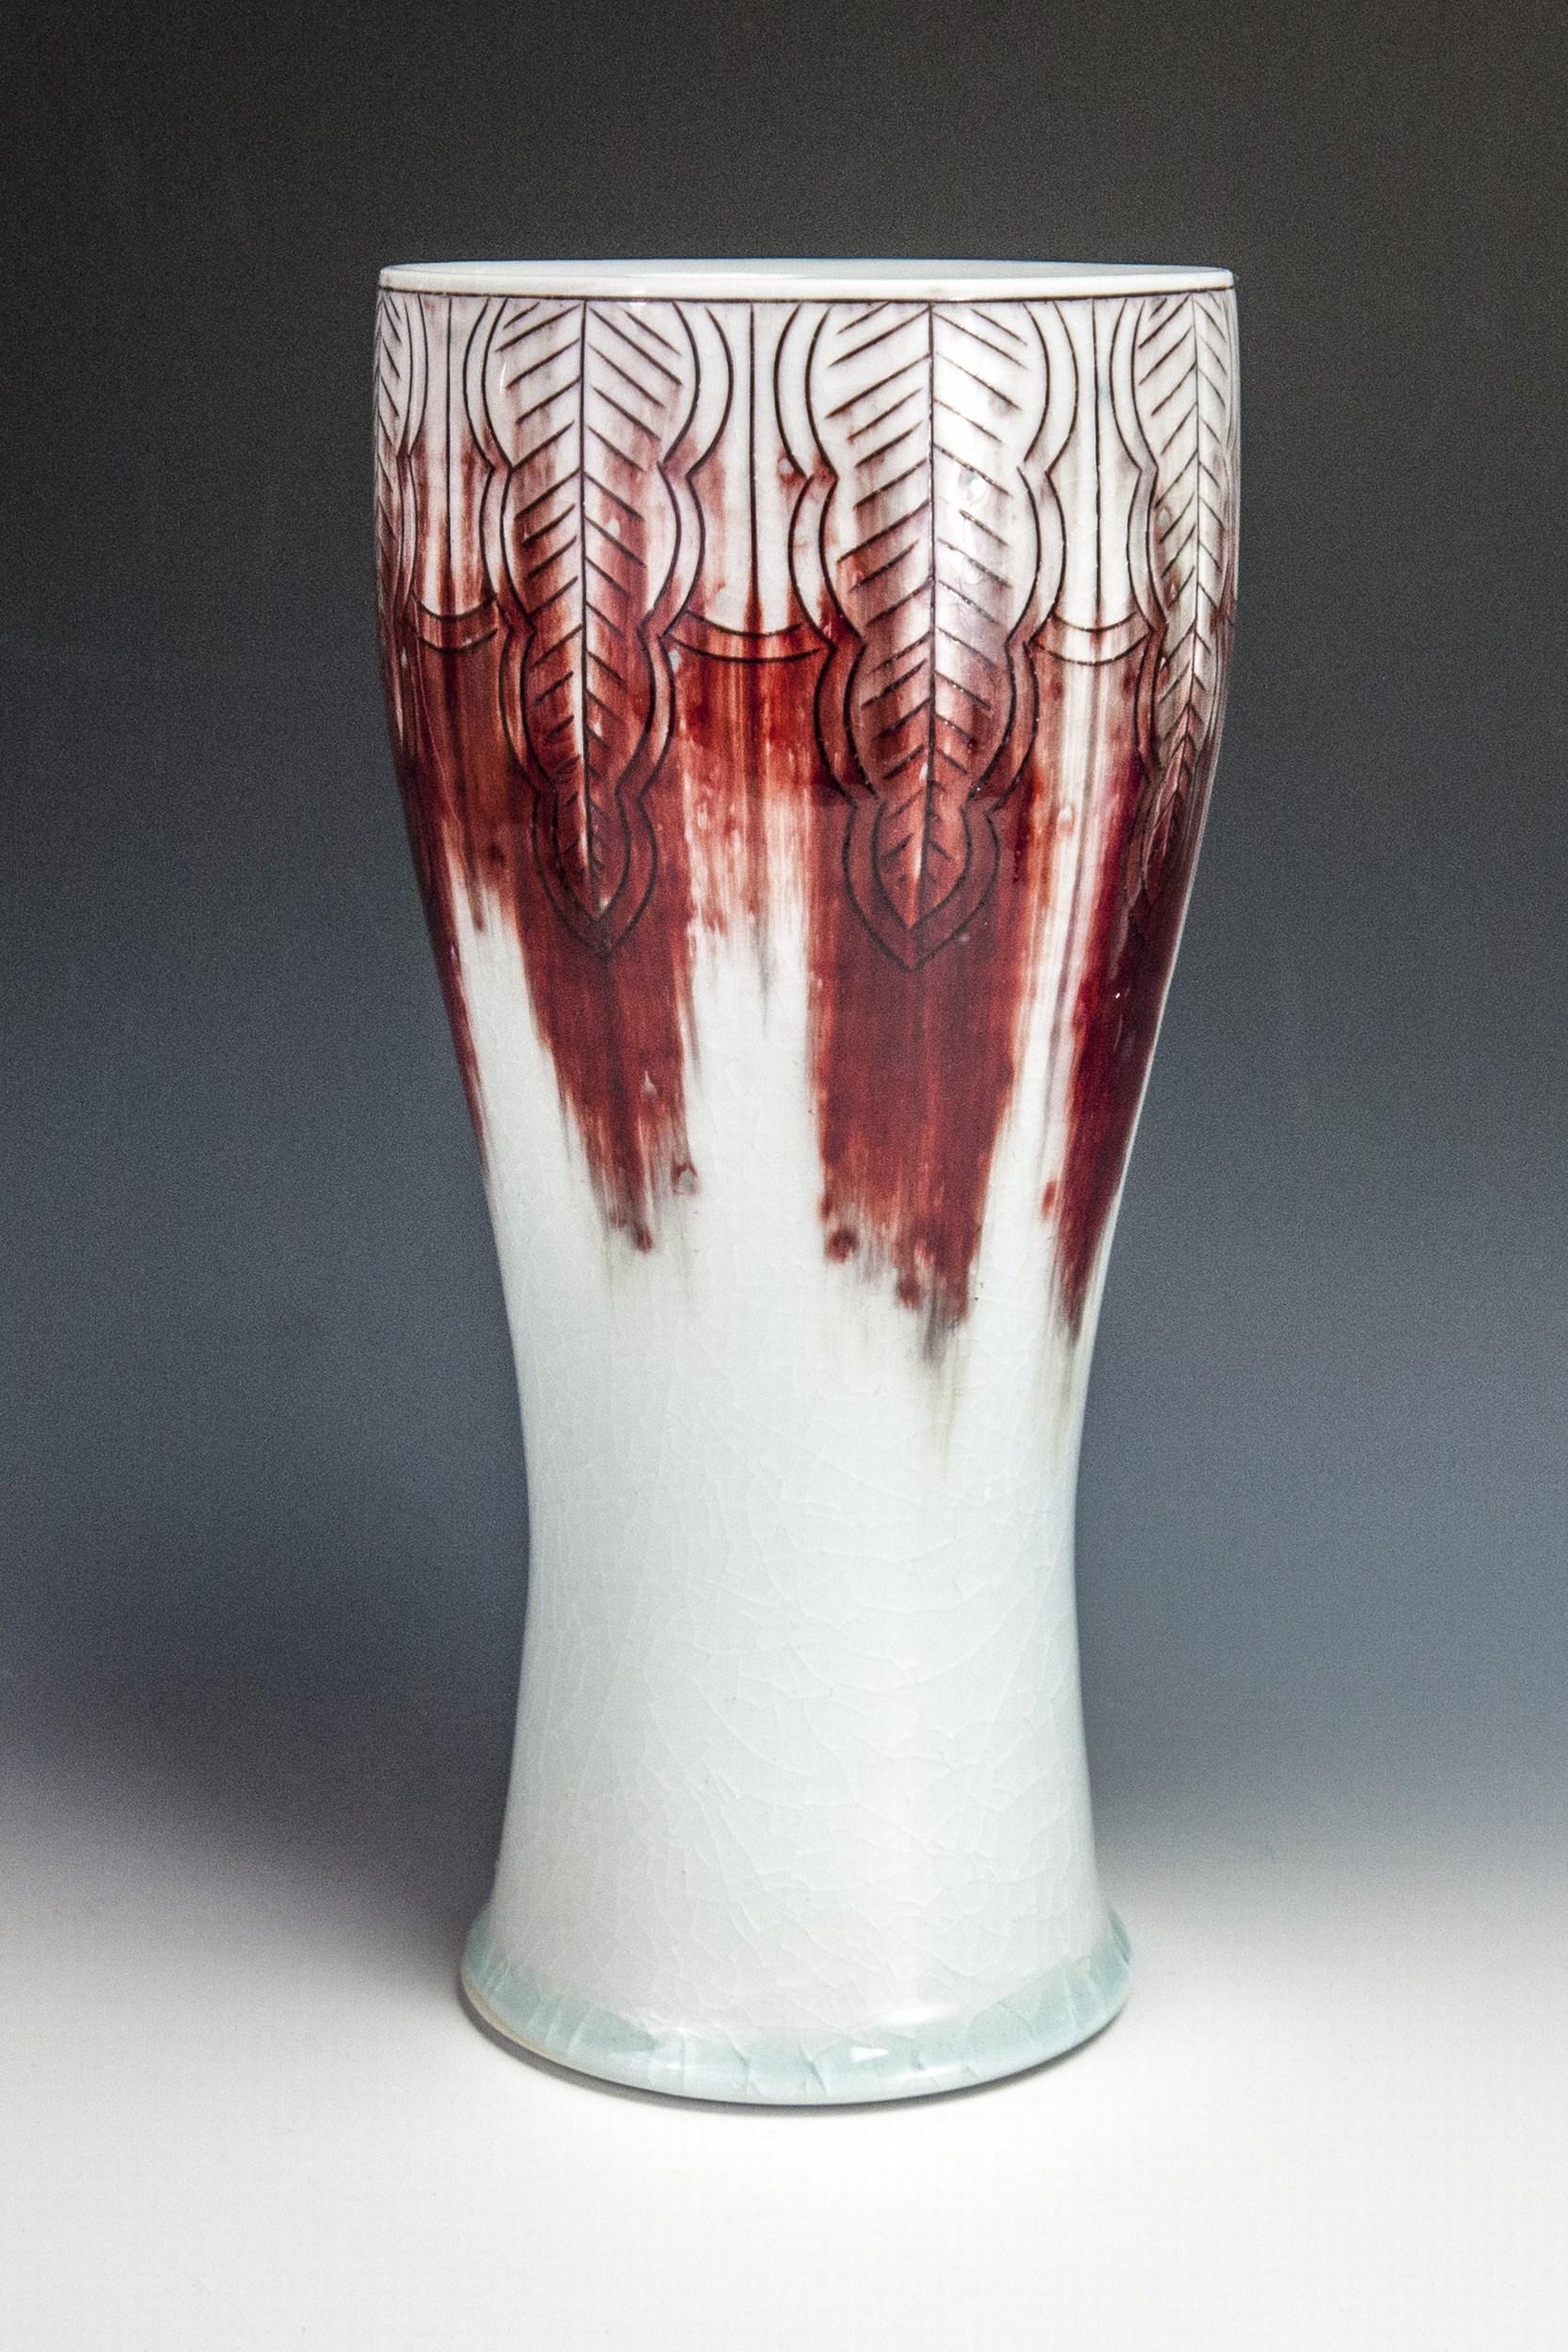 Red Blush Vase - Contemporary Sculpture by Steven Young Lee